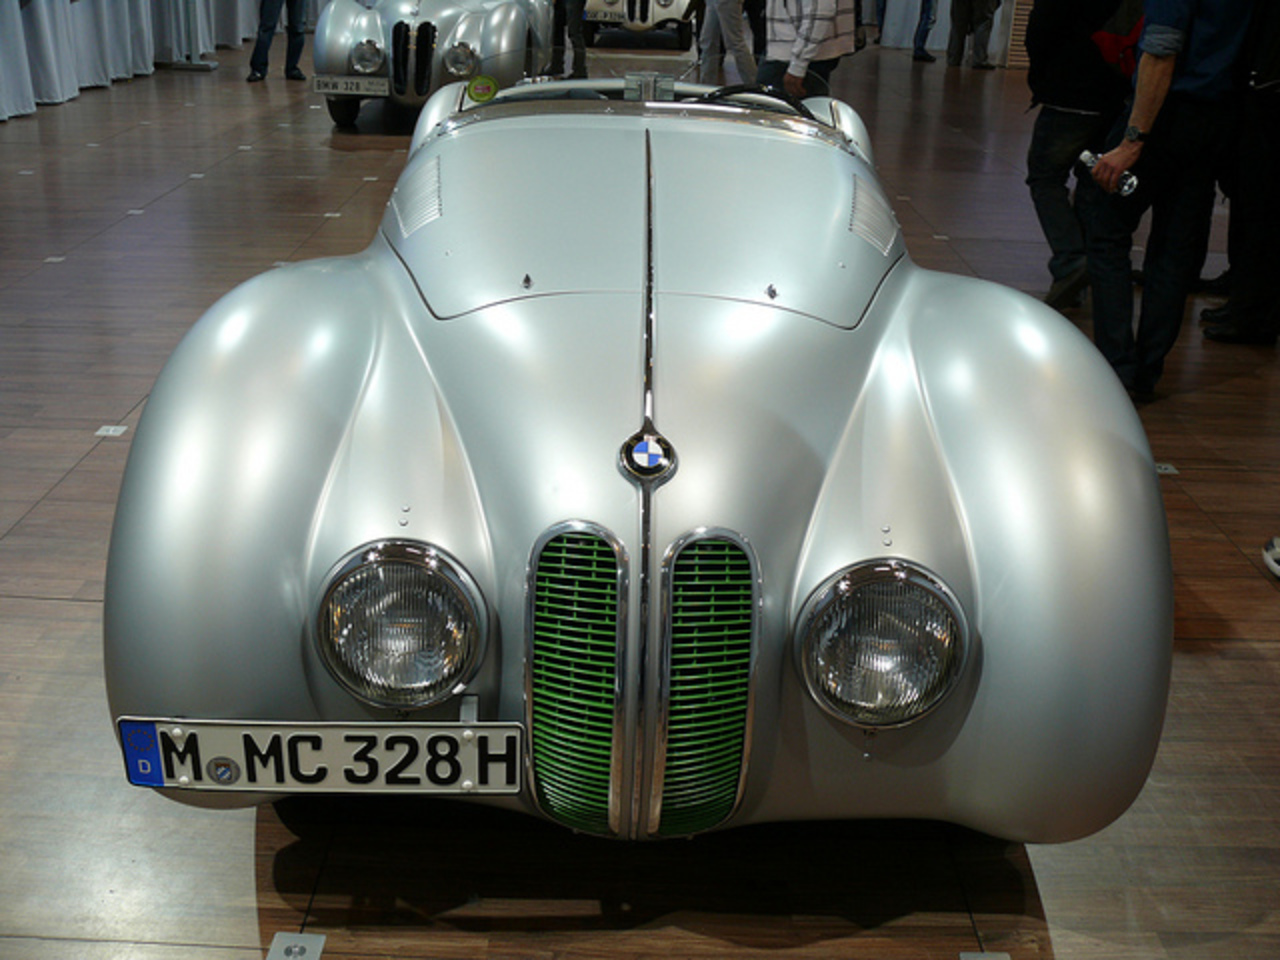 BMW 328 Mille Miglia Roadster | Flickr - Photo Sharing!